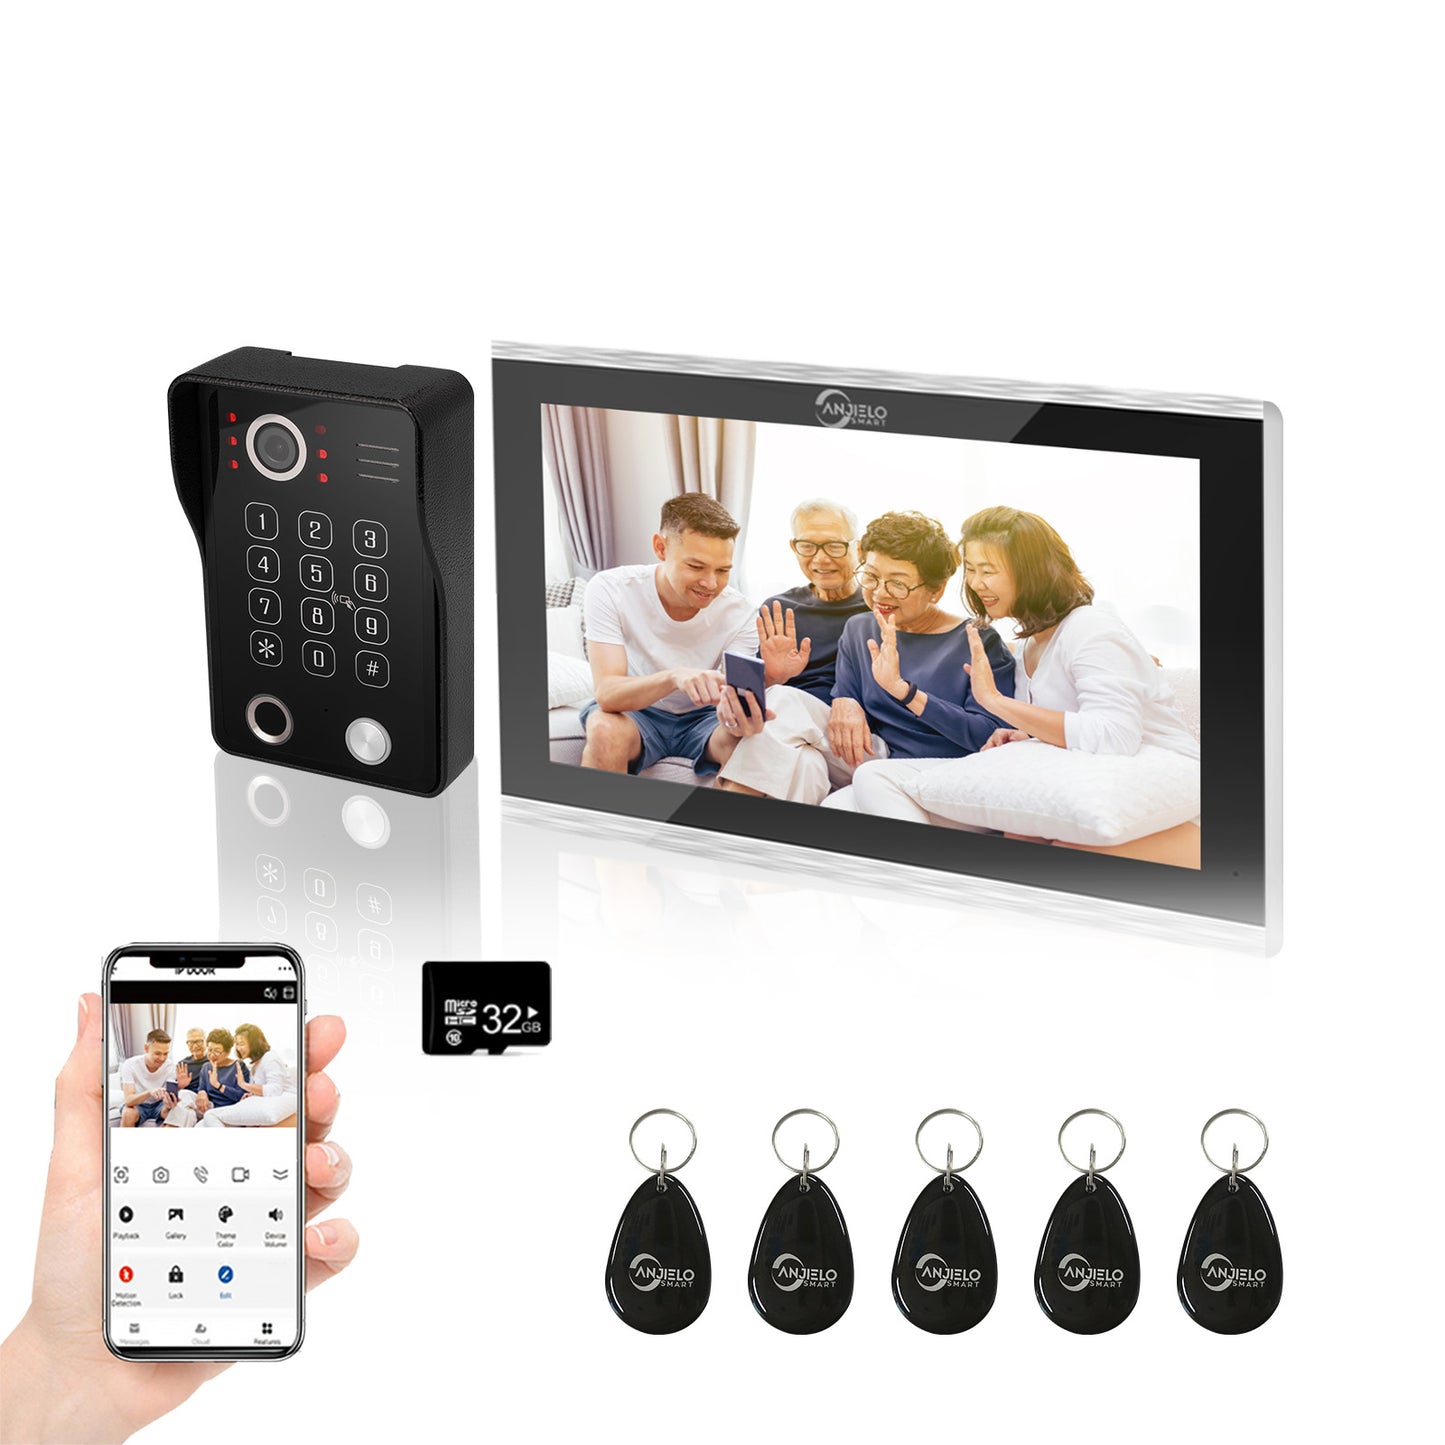 1080P Tuya Smart WiF Video Door phone Doorbell Camera with RFID Card unlcok Fingerprint and Passcode unlock for the Apartment Intercom System for Home Villa